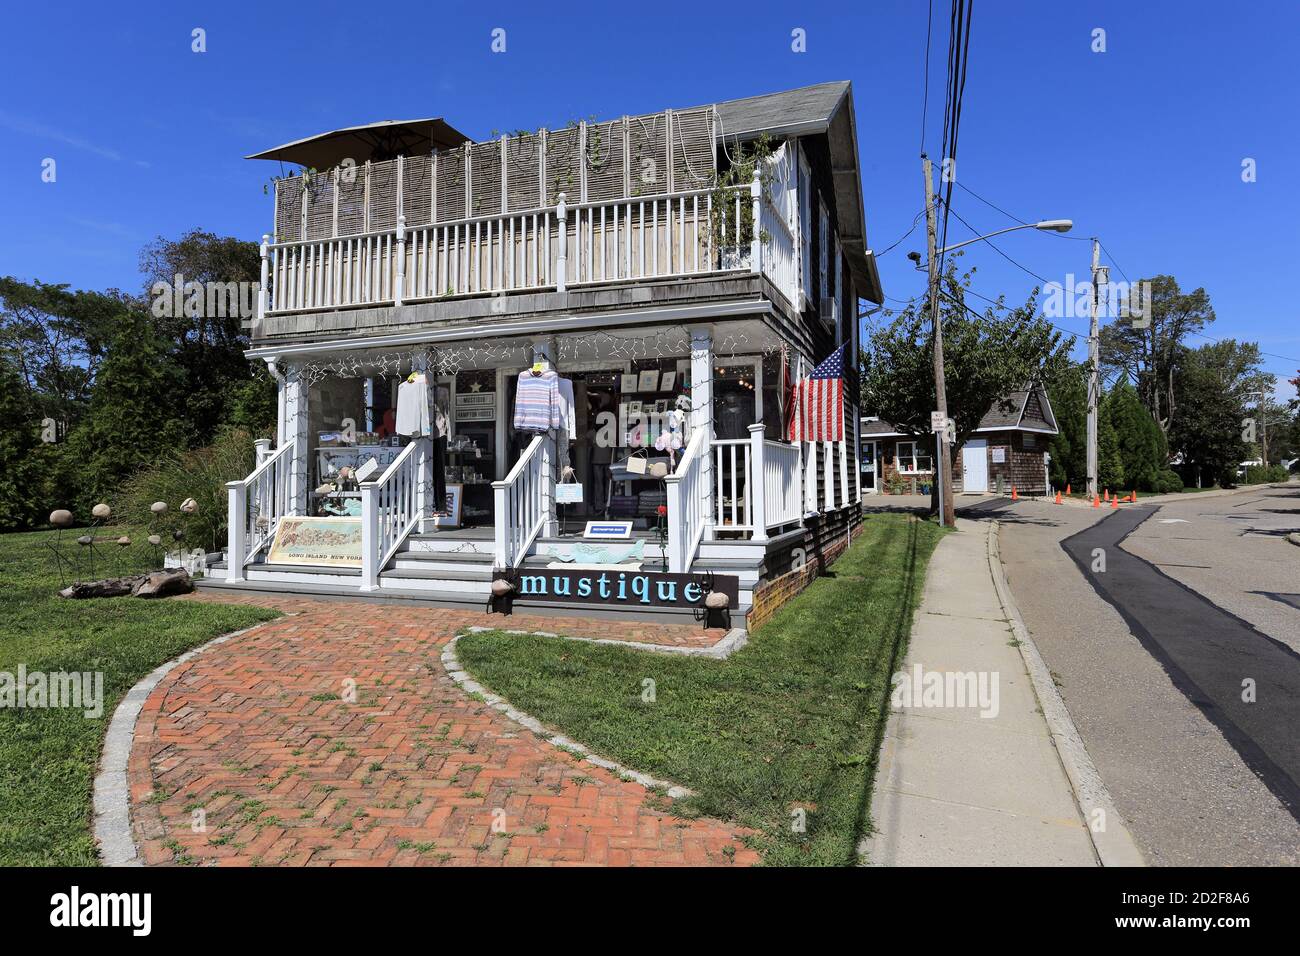 Boutique and gift shop Westhampton Long Island New York Stock Photo